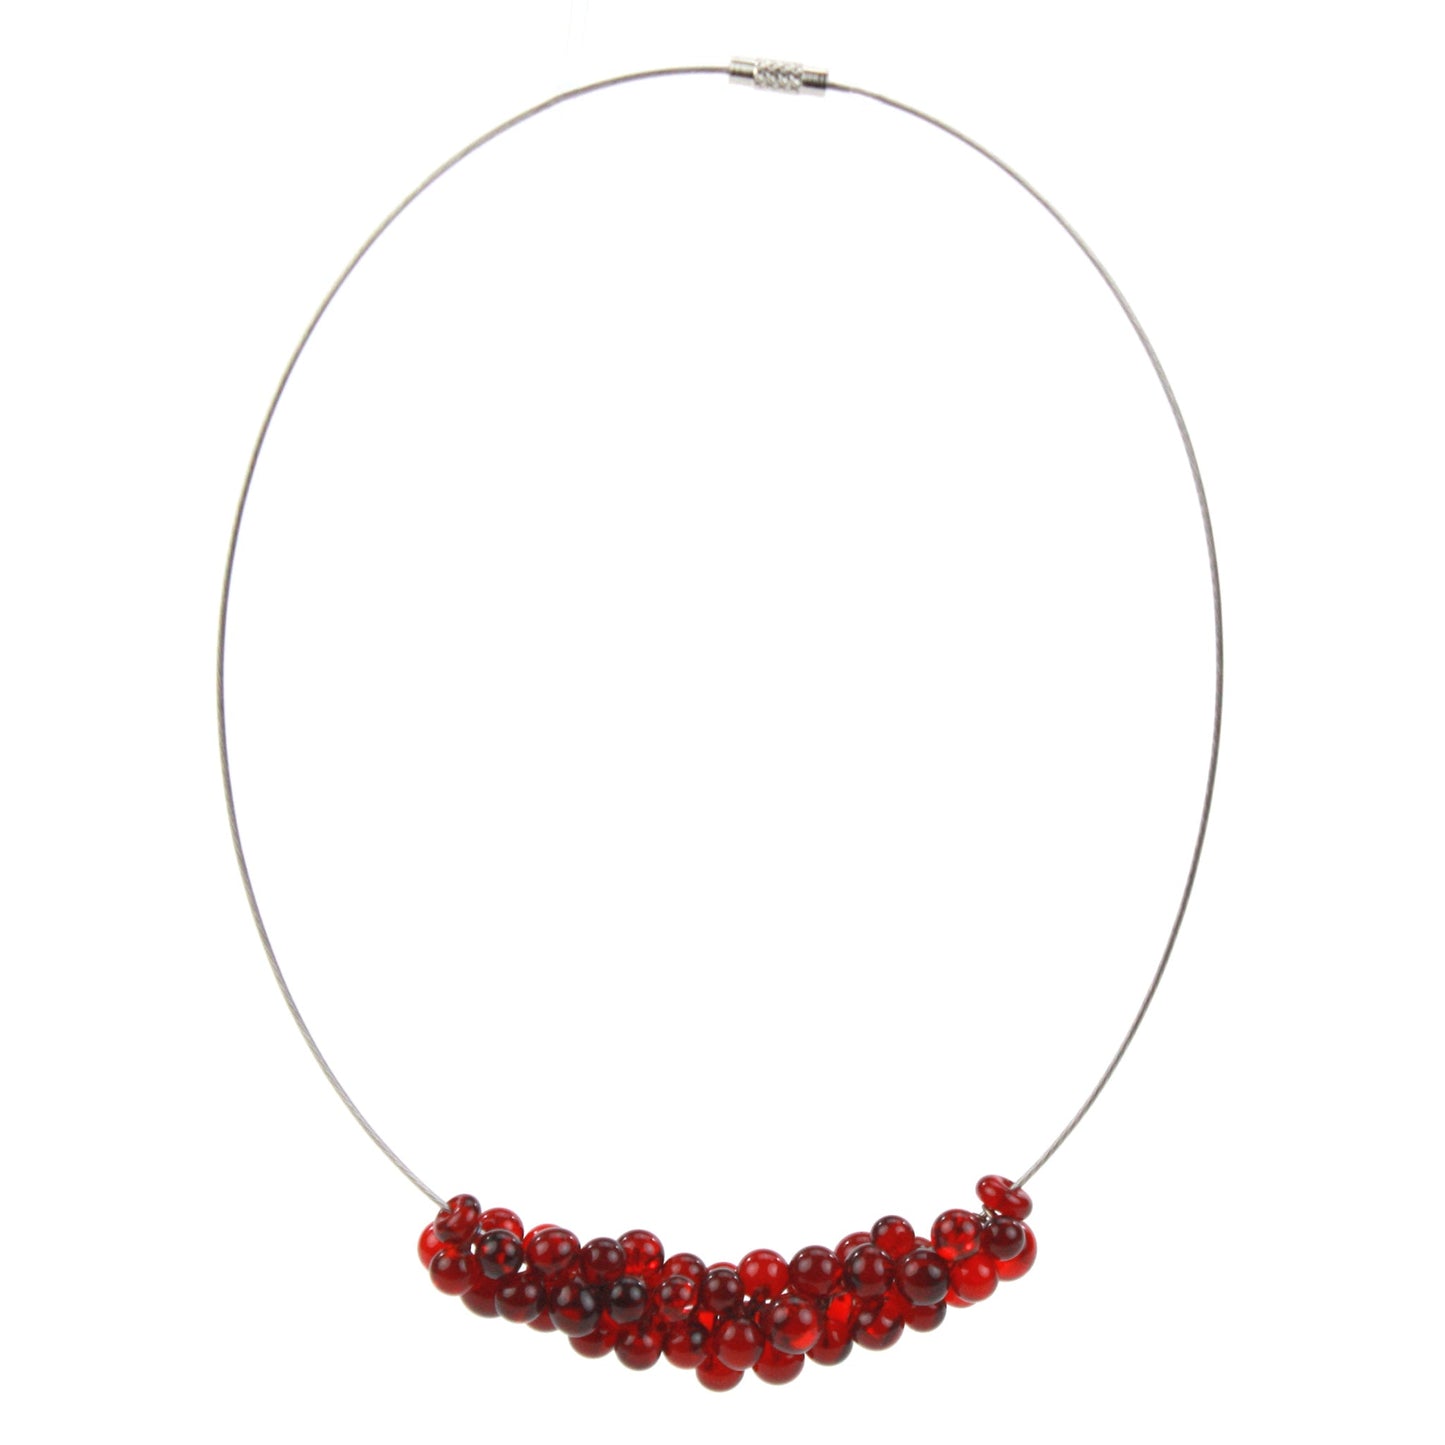 Petite Chroma Necklace in Red